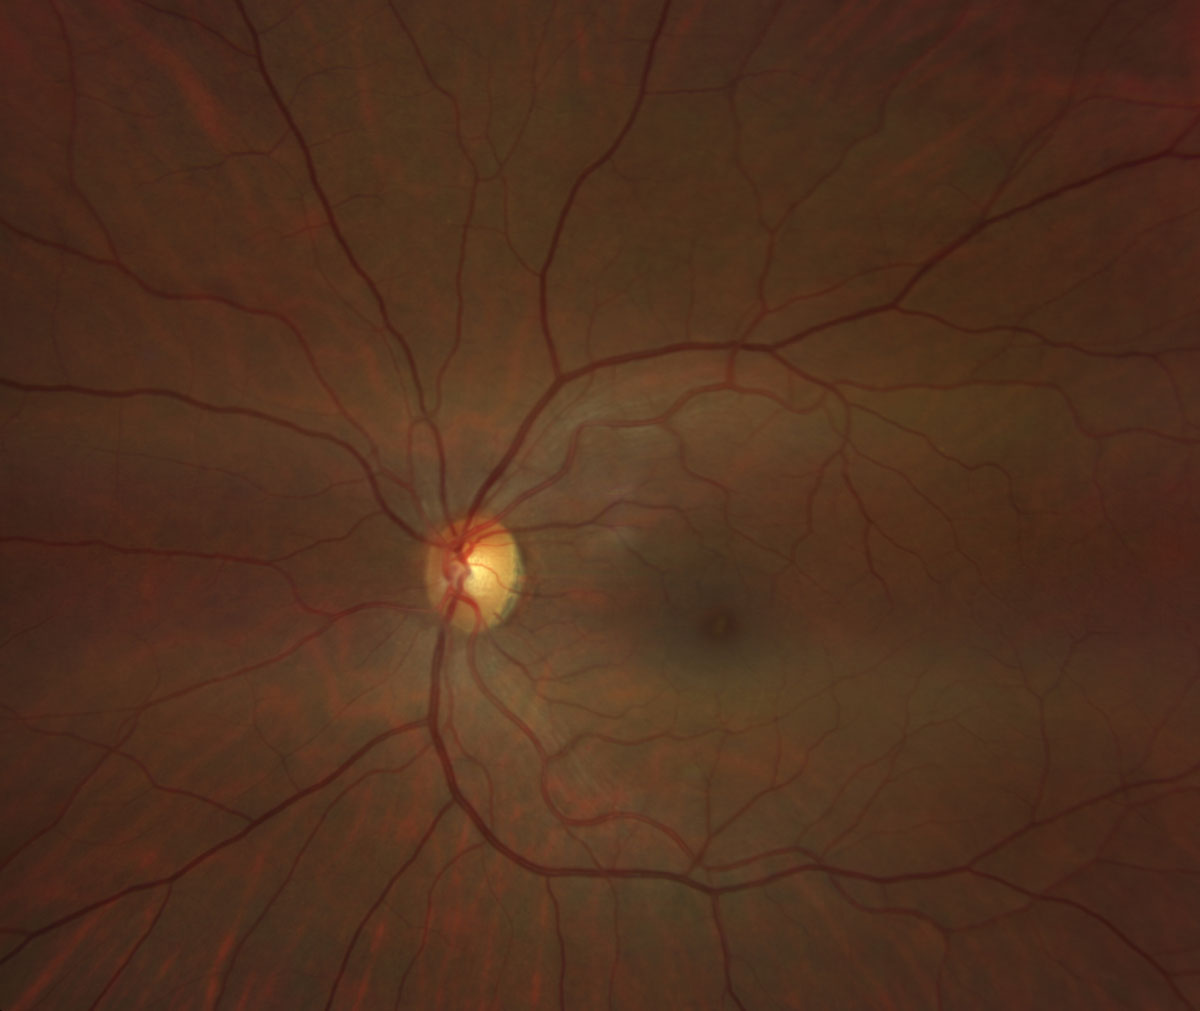 Fig. 4. Zeiss Clarus fundus photo of the left eye.